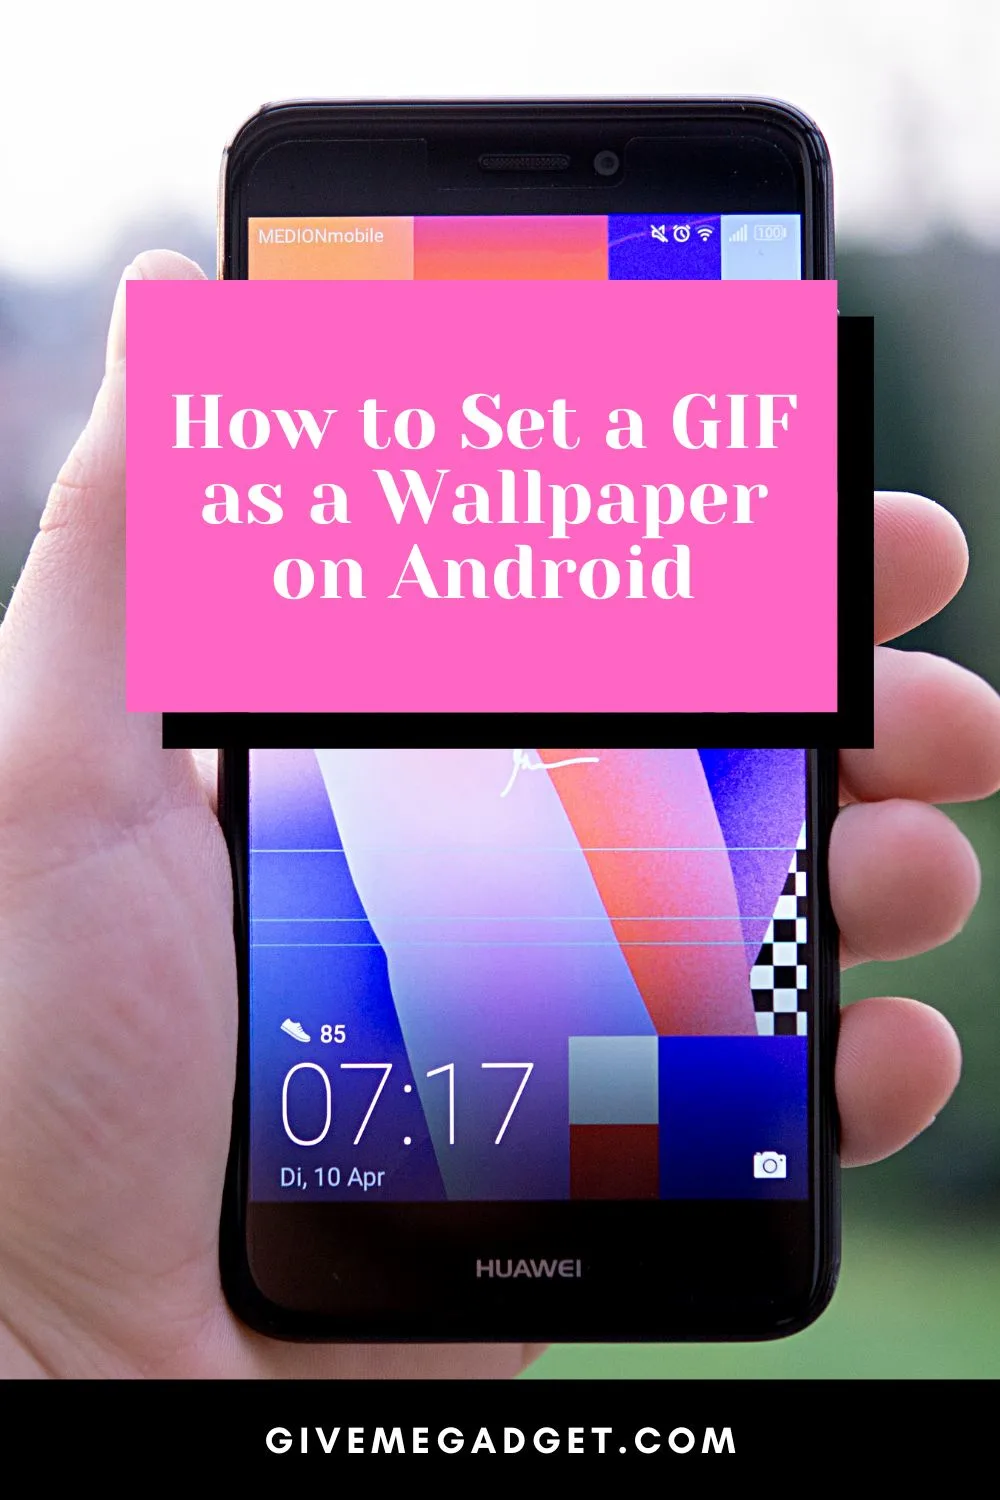 How to Set a GIF as a Wallpaper on Android - Complete Guide